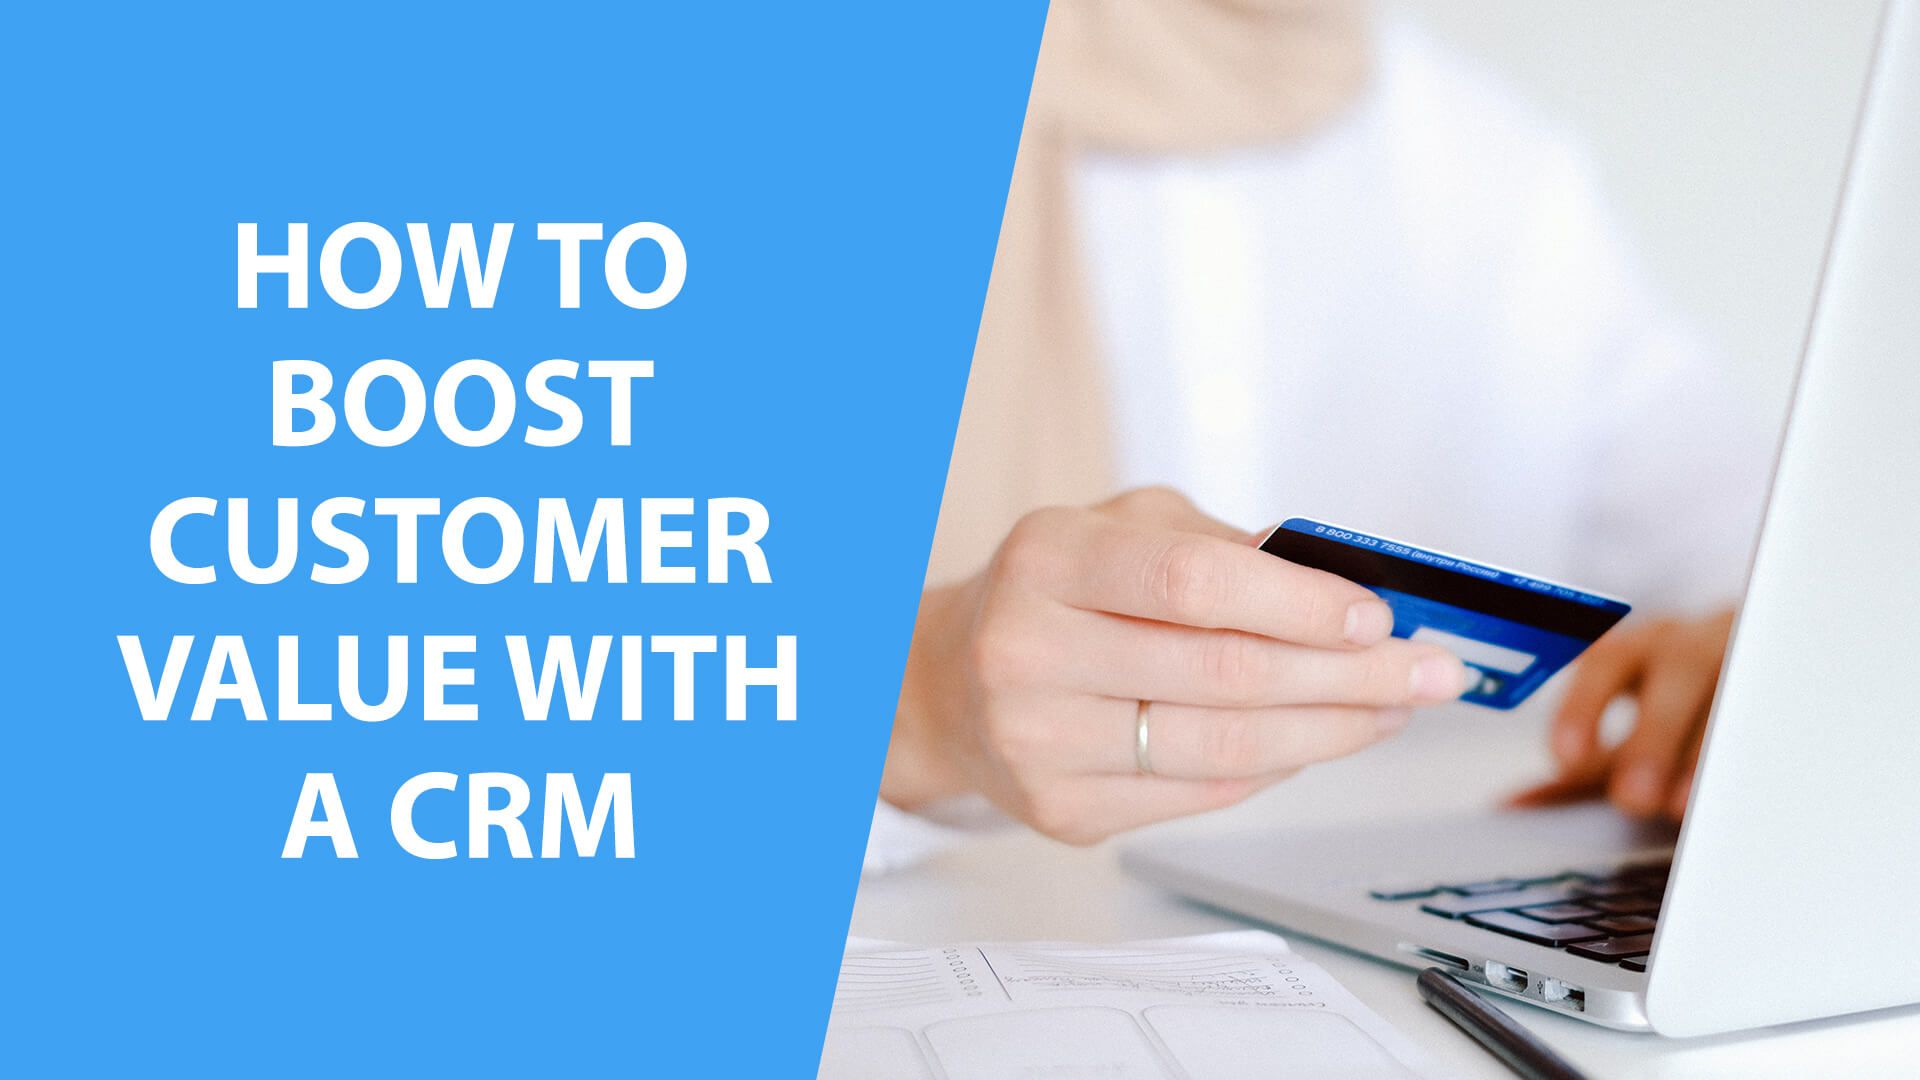 How To Boost Customer Value With a CRM